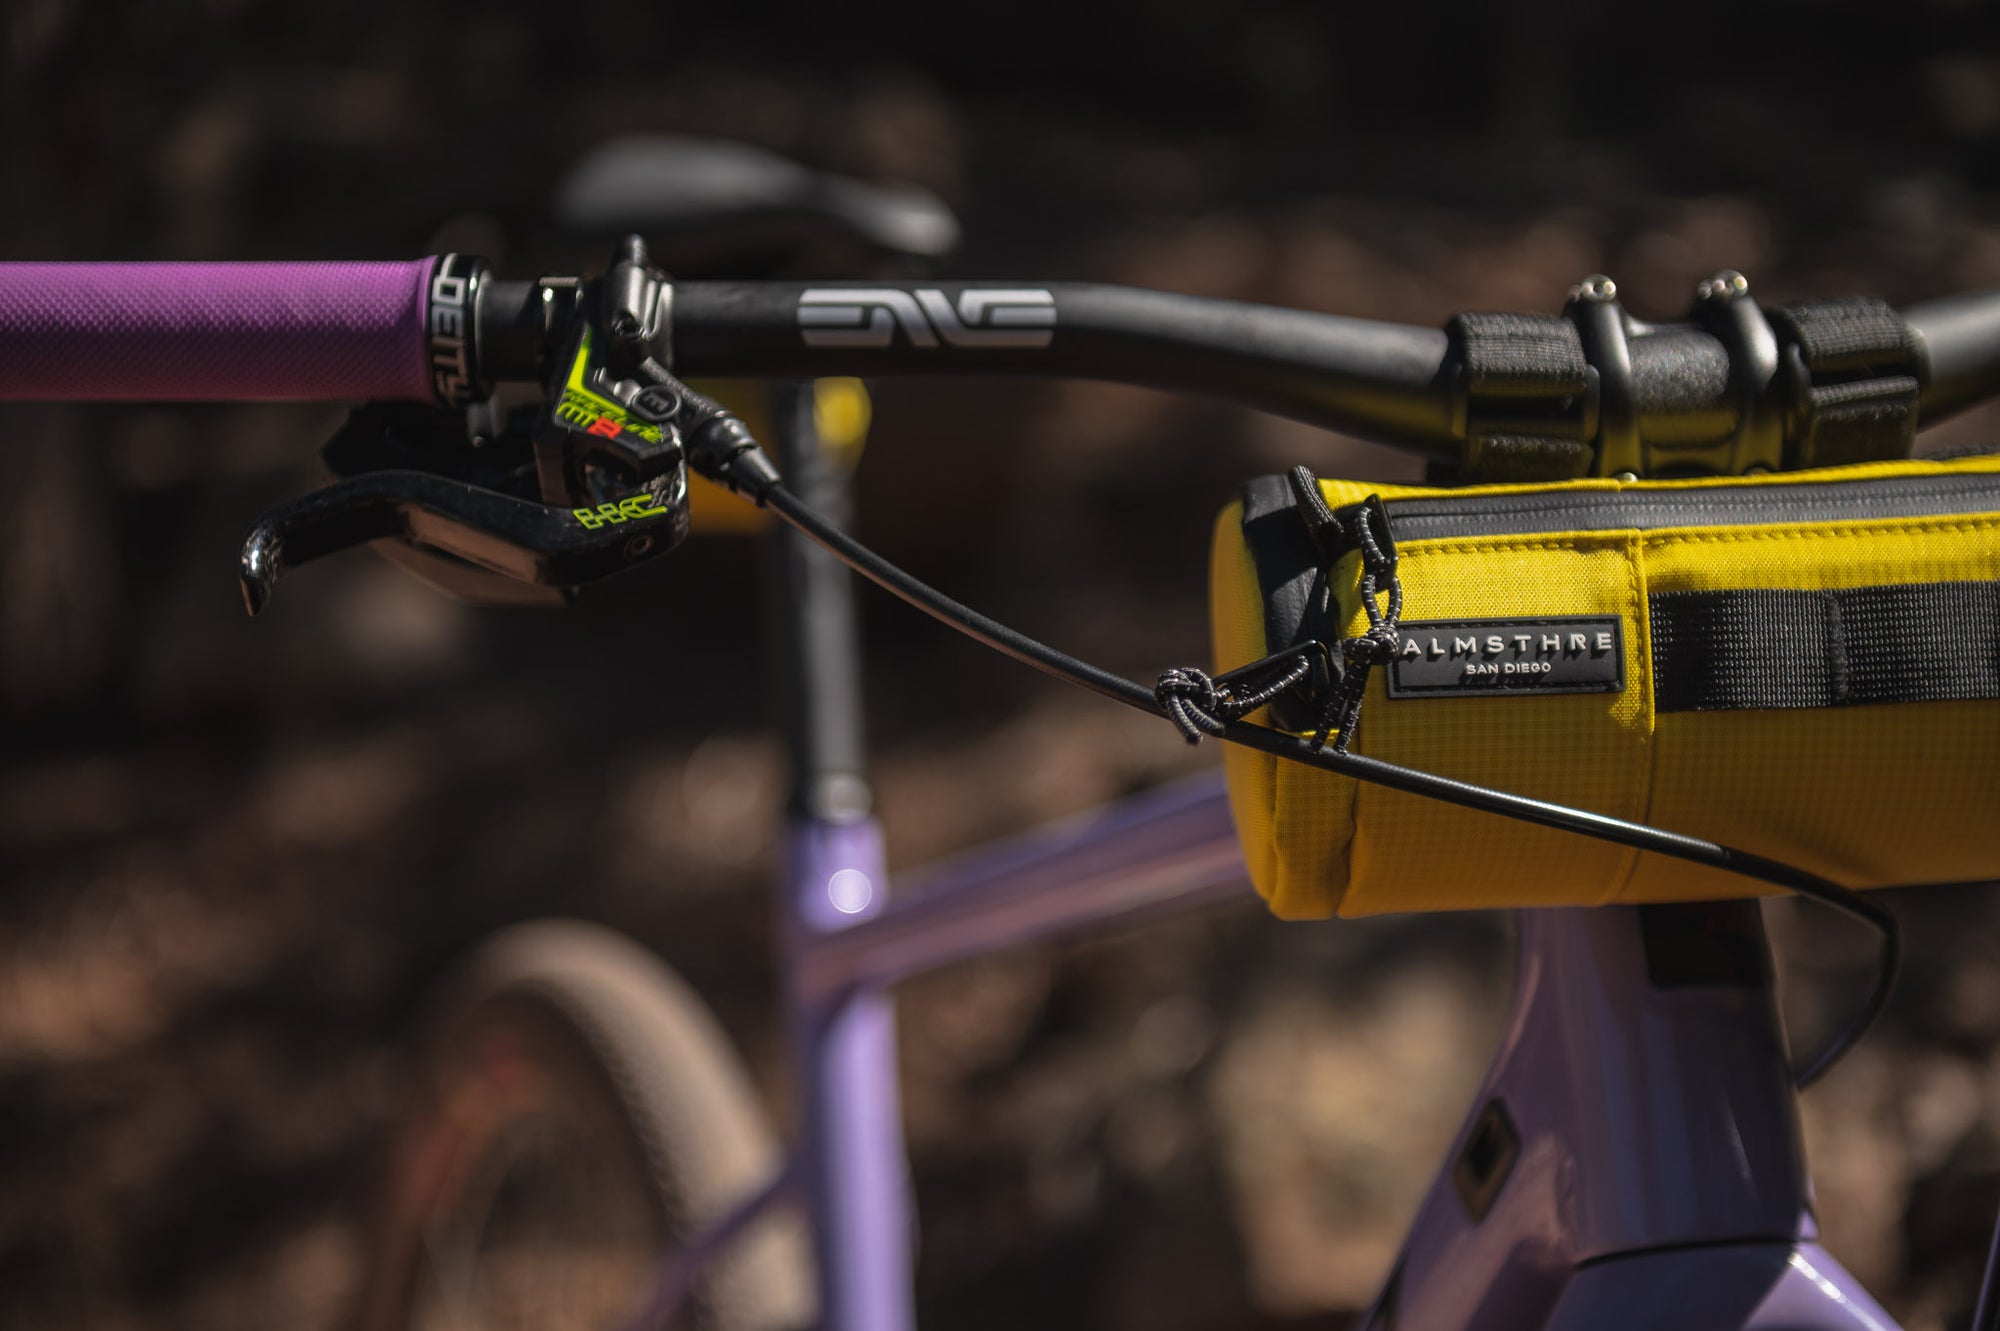 ALMSTHRE handlebar bag on the Santa Cruz Stigmata bike's handlebars. The compact bag in yellow offers cyclists a practical storage solution for essential items during rides.